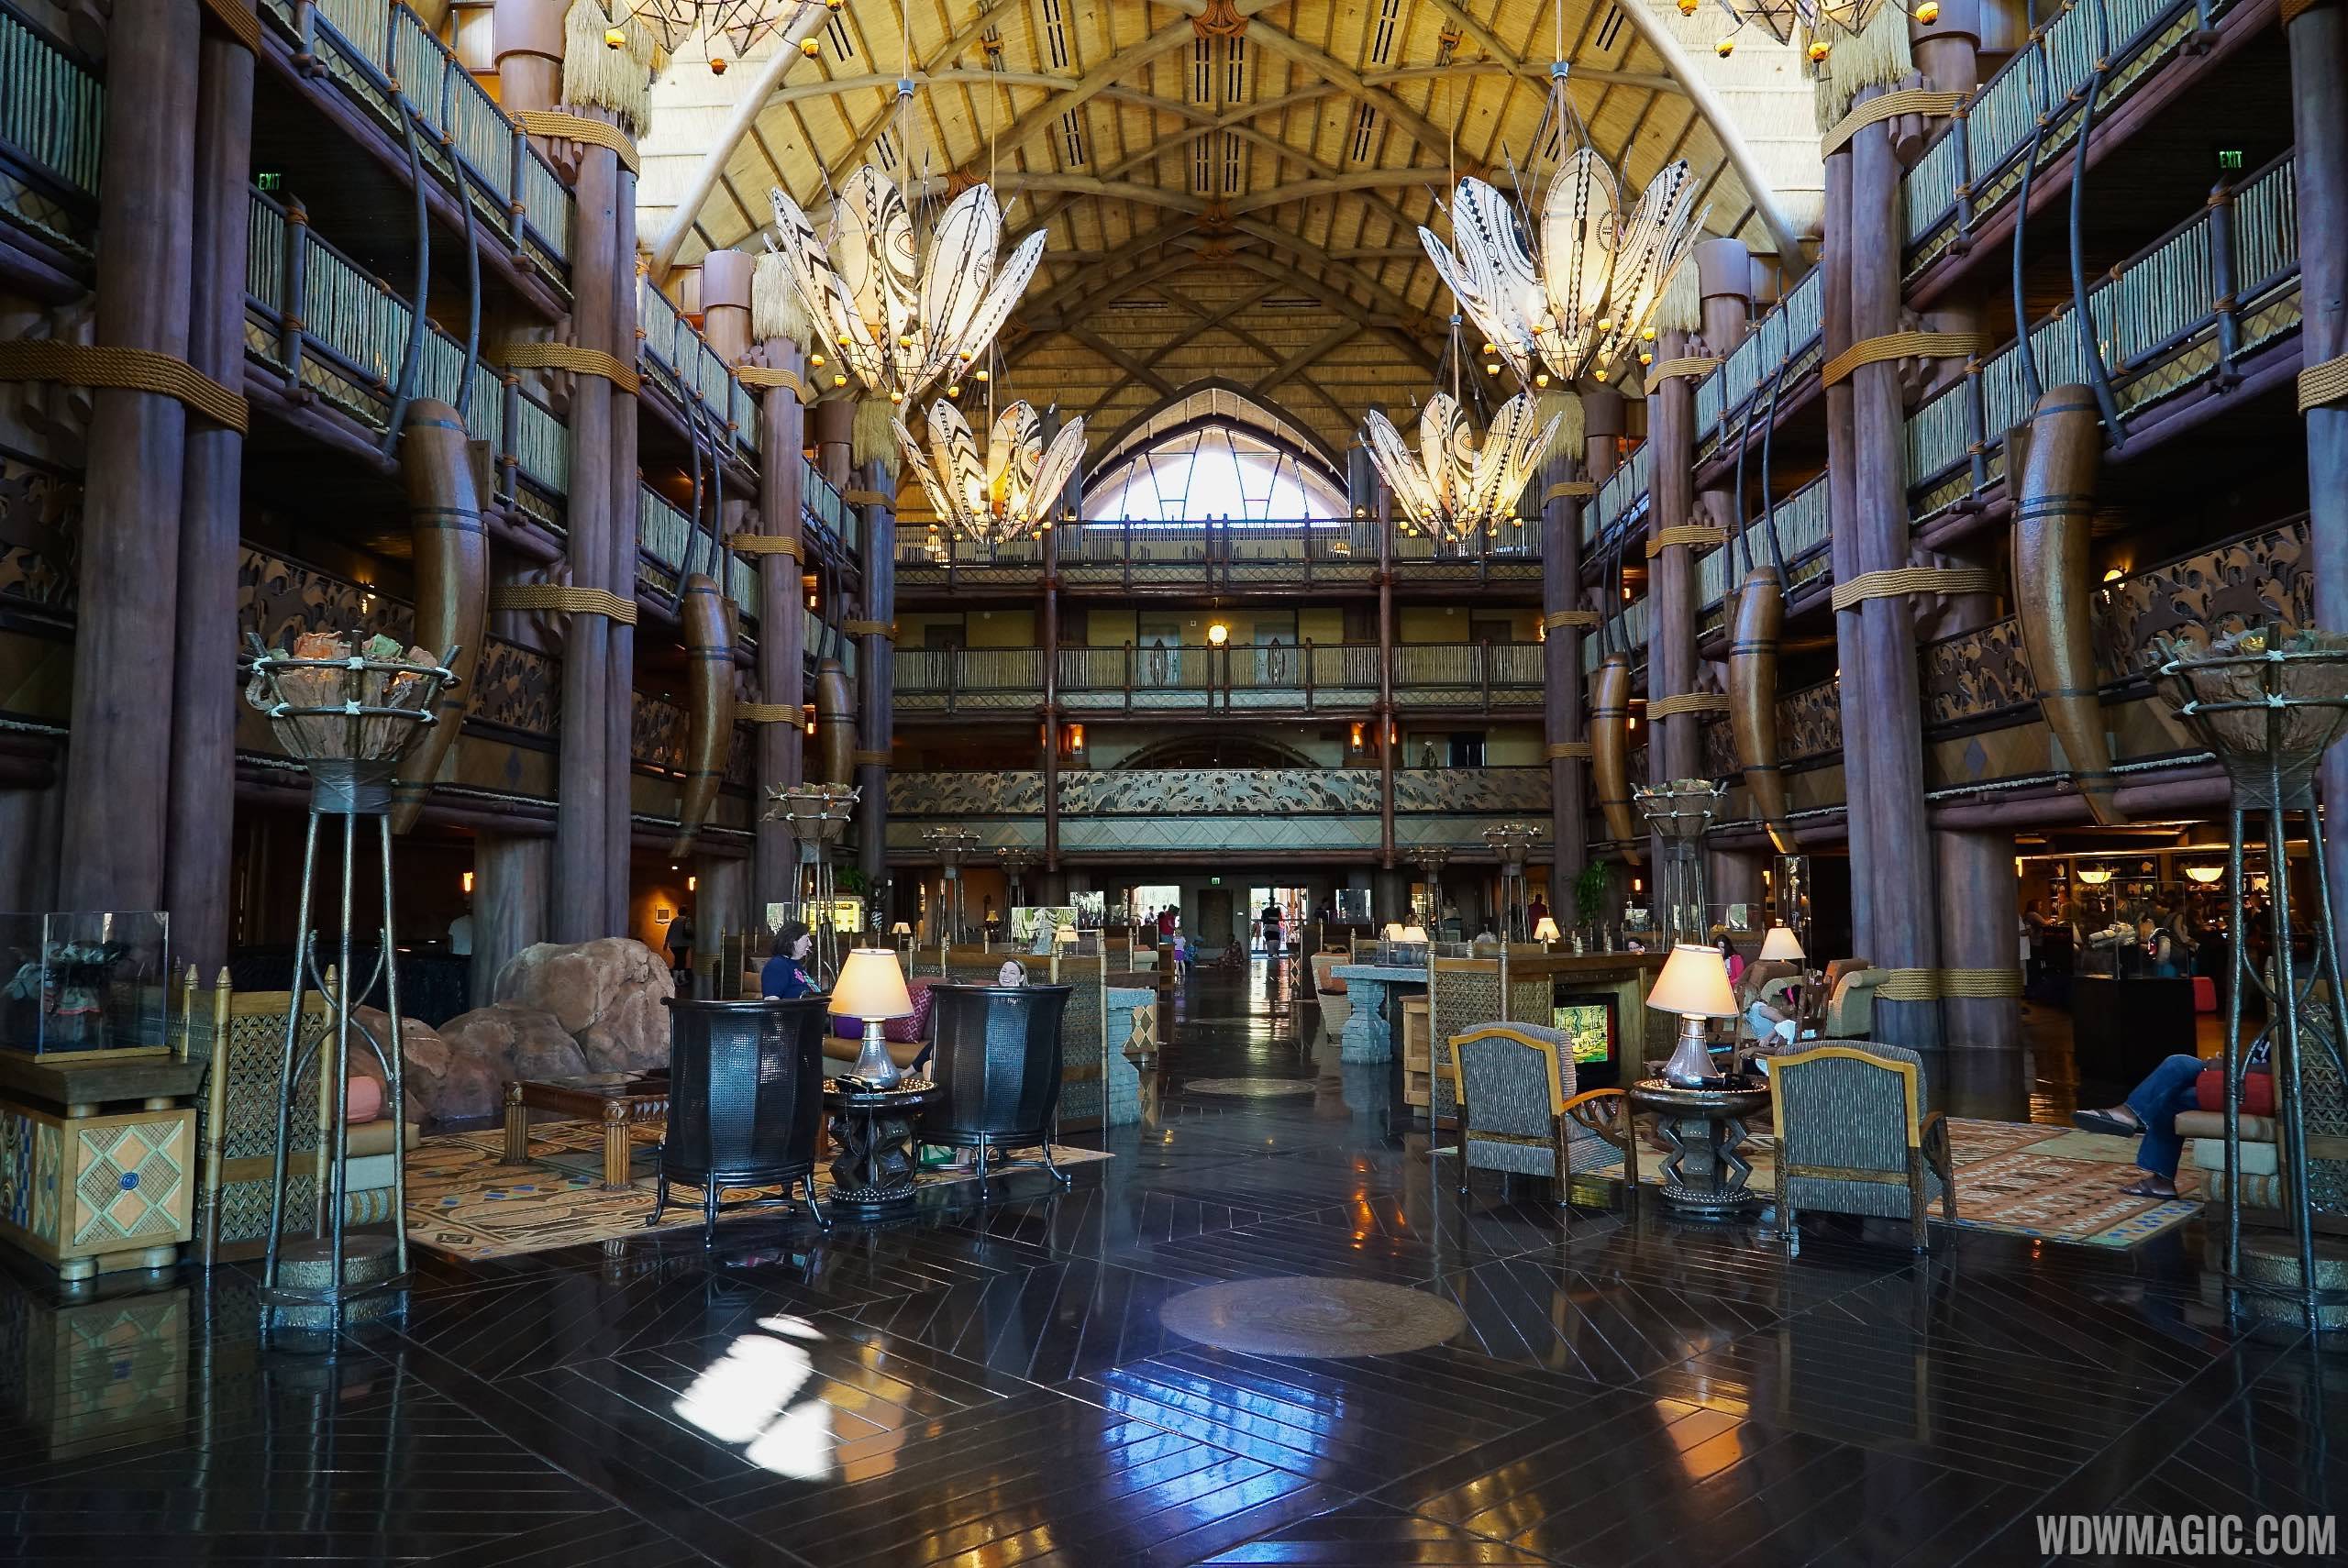 Guests parking overnight at Disney's Animal Kingdom Lodge will soon be charged $24 per night